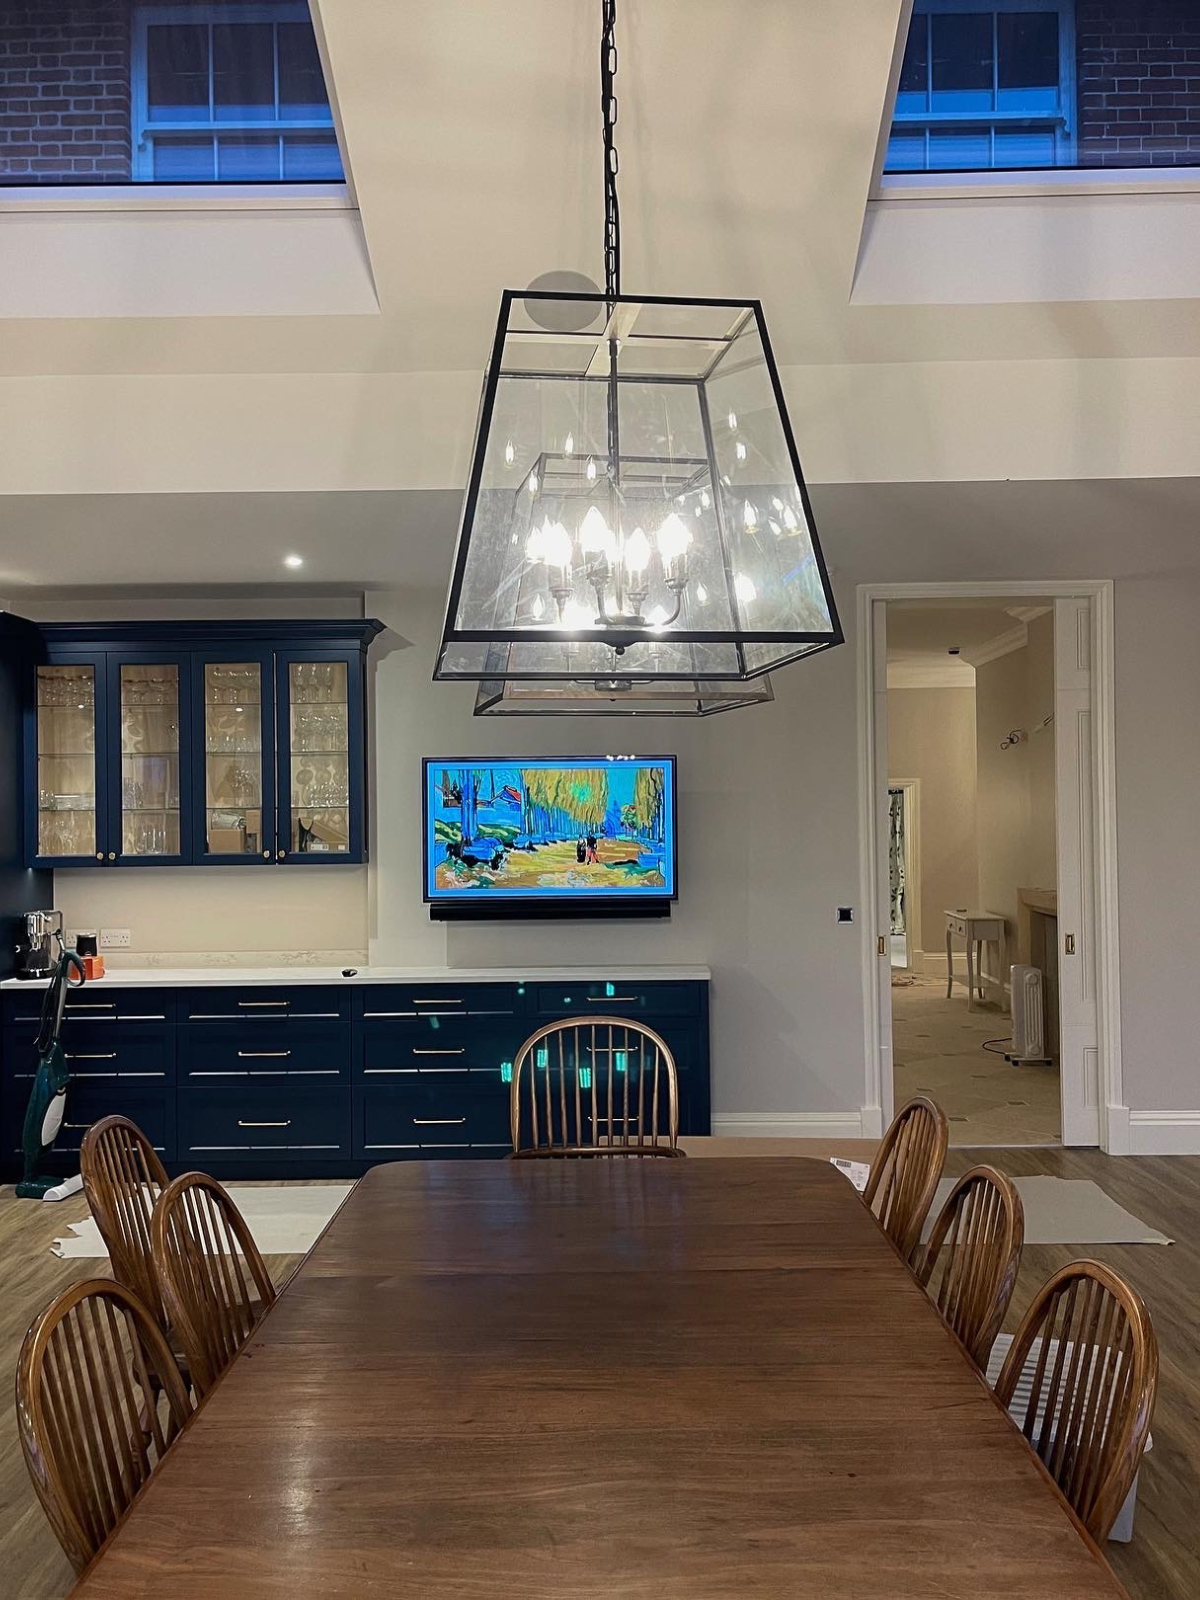 Dining room table with pendant lighting and in-ceiling speakers